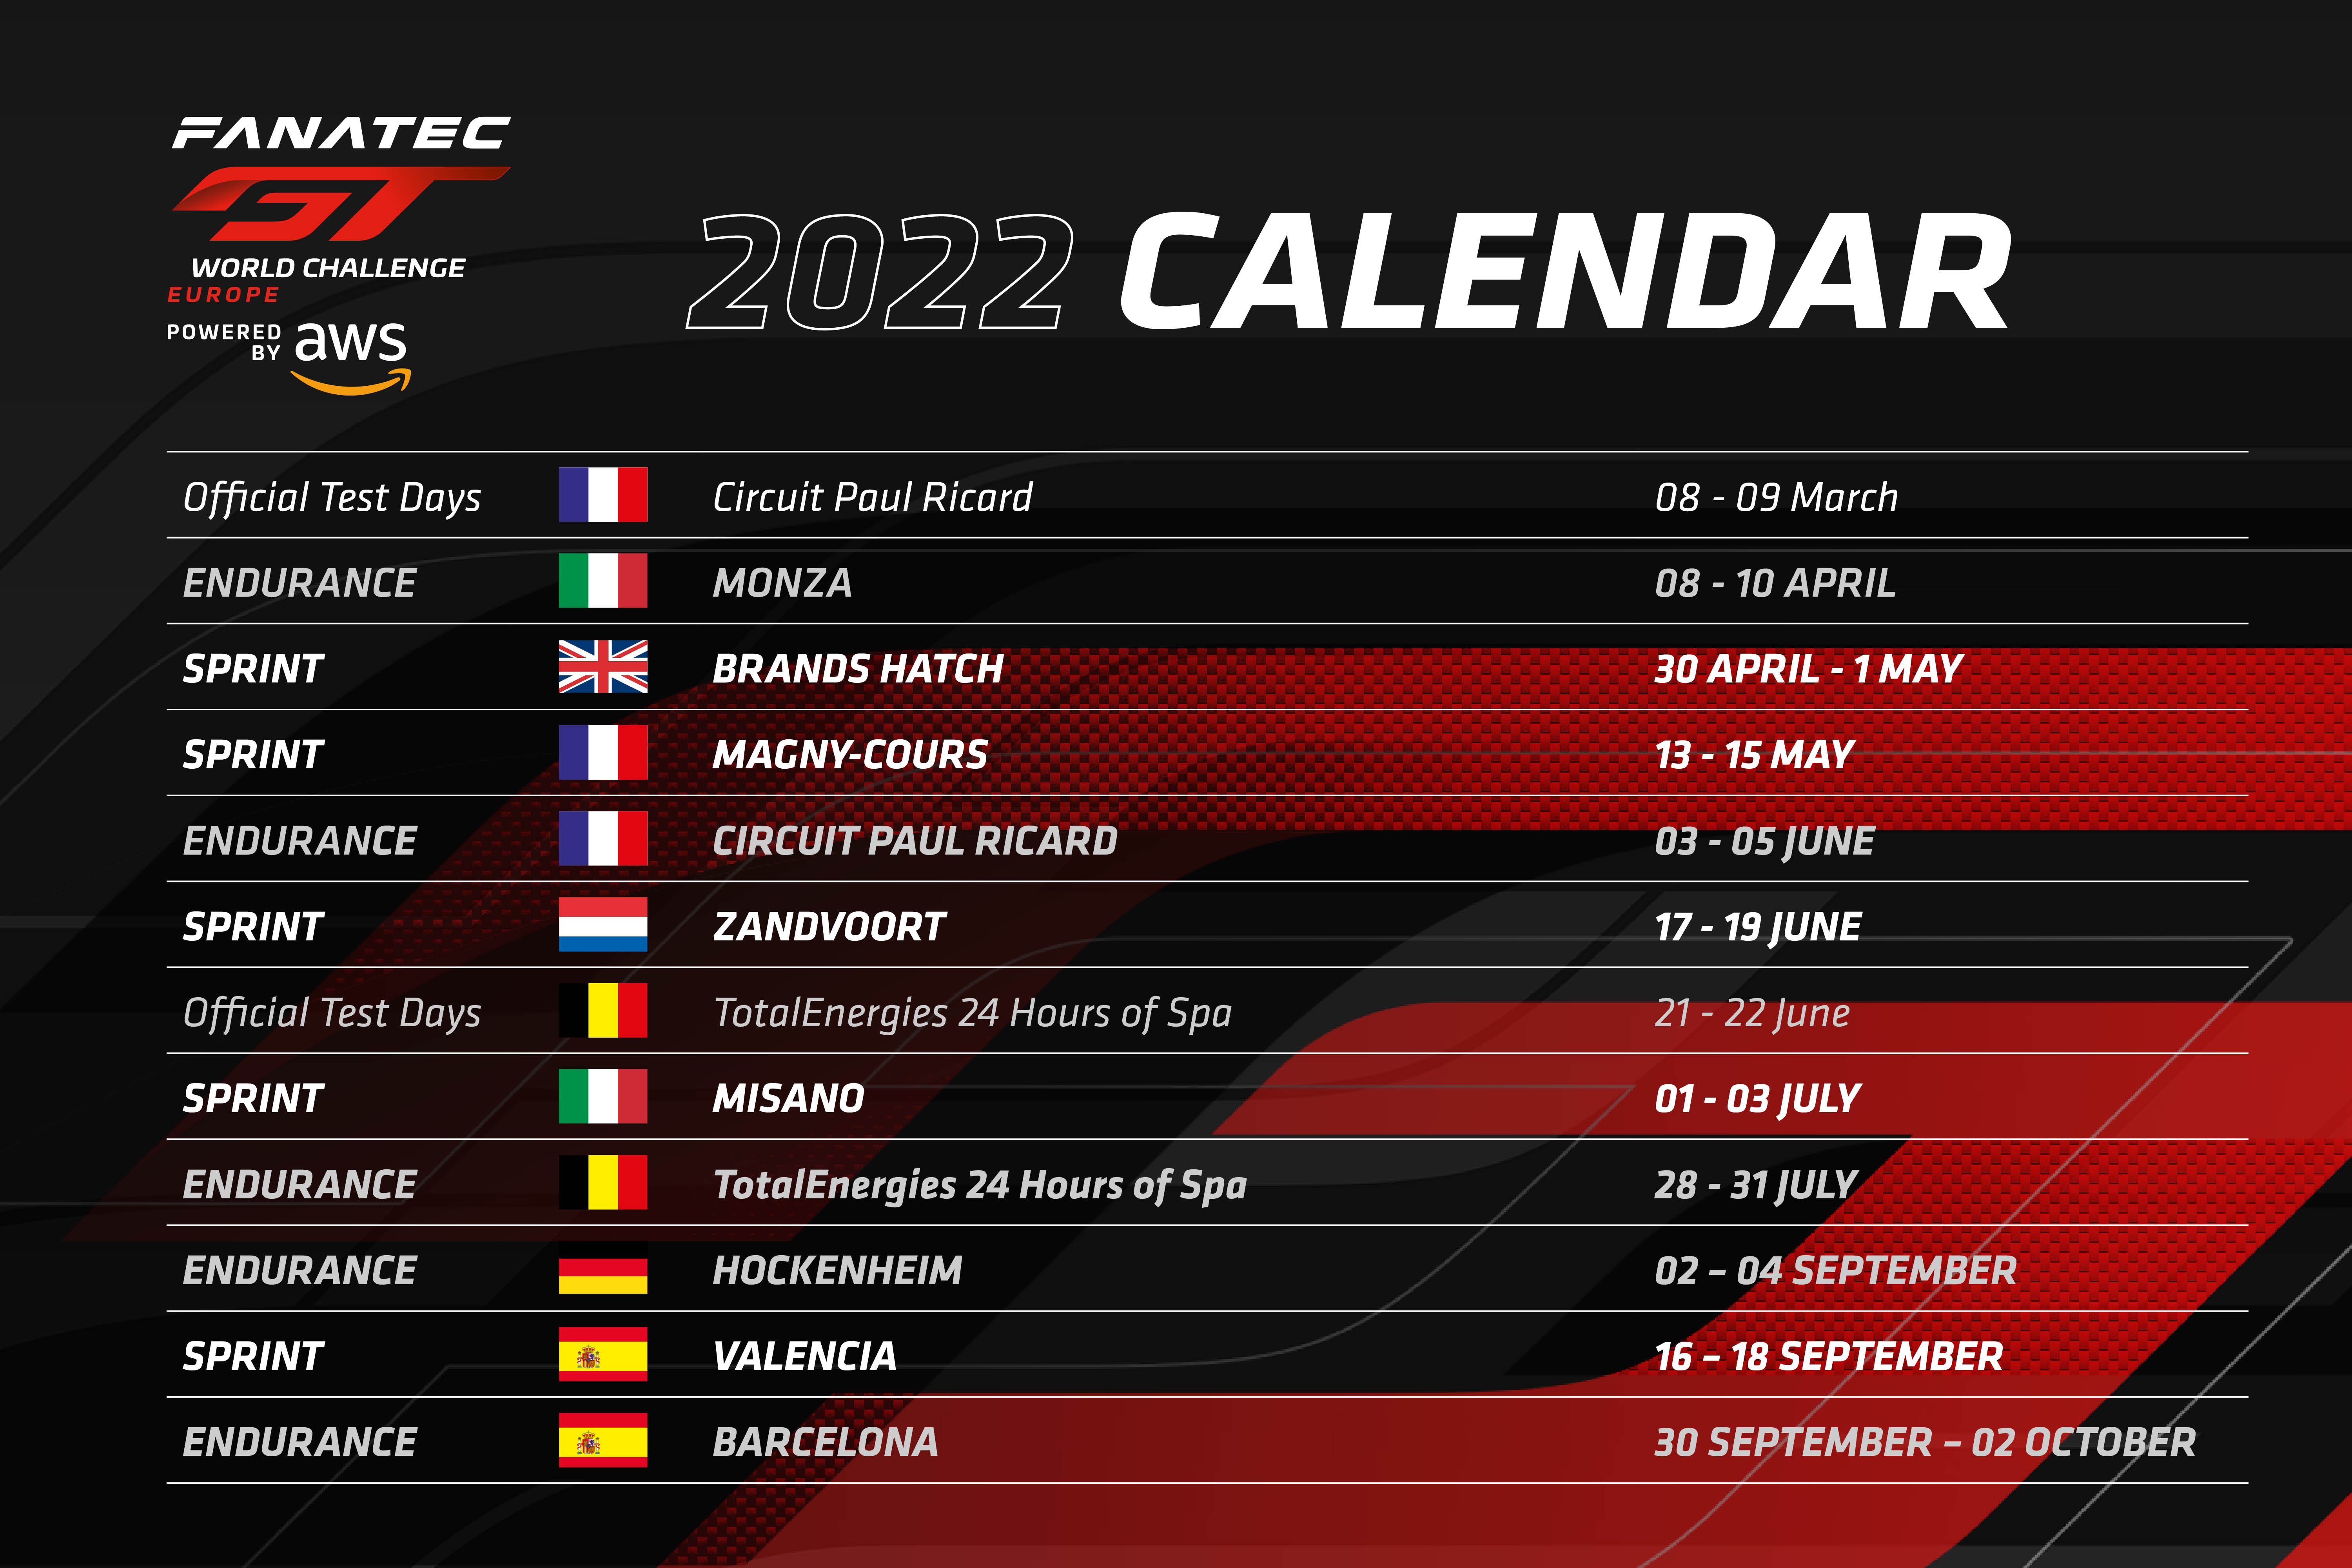 Motorsport Calendar 2022 European And American Series Among First Set Of 2022 Calendars Confirmed By  Sro Motorsports Group | Sro Motorsports Group